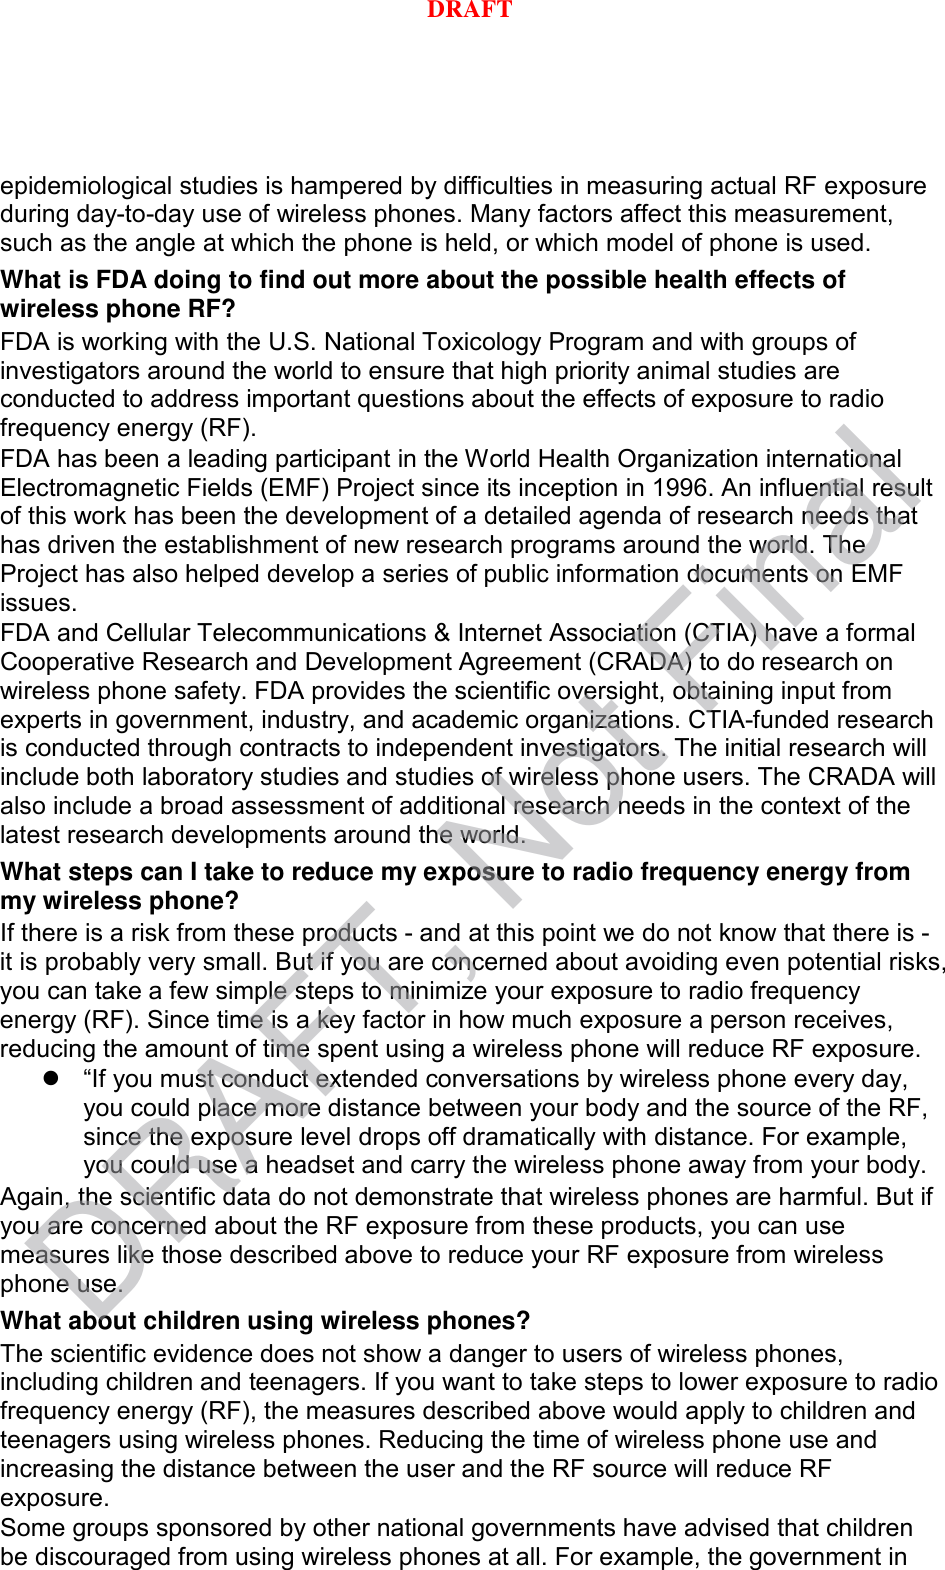 epidemiological studies is hampered by difficulties in measuring actual RF exposure during day-to-day use of wireless phones. Many factors affect this measurement, such as the angle at which the phone is held, or which model of phone is used. What is FDA doing to find out more about the possible health effects of wireless phone RF? FDA is working with the U.S. National Toxicology Program and with groups of investigators around the world to ensure that high priority animal studies are conducted to address important questions about the effects of exposure to radio frequency energy (RF). FDA has been a leading participant in the World Health Organization international Electromagnetic Fields (EMF) Project since its inception in 1996. An influential result of this work has been the development of a detailed agenda of research needs that has driven the establishment of new research programs around the world. The Project has also helped develop a series of public information documents on EMF issues. FDA and Cellular Telecommunications &amp; Internet Association (CTIA) have a formal Cooperative Research and Development Agreement (CRADA) to do research on wireless phone safety. FDA provides the scientific oversight, obtaining input from experts in government, industry, and academic organizations. CTIA-funded research is conducted through contracts to independent investigators. The initial research will include both laboratory studies and studies of wireless phone users. The CRADA will also include a broad assessment of additional research needs in the context of the latest research developments around the world. What steps can I take to reduce my exposure to radio frequency energy from my wireless phone? If there is a risk from these products - and at this point we do not know that there is - it is probably very small. But if you are concerned about avoiding even potential risks, you can take a few simple steps to minimize your exposure to radio frequency energy (RF). Since time is a key factor in how much exposure a person receives, reducing the amount of time spent using a wireless phone will reduce RF exposure.  “If you must conduct extended conversations by wireless phone every day, you could place more distance between your body and the source of the RF, since the exposure level drops off dramatically with distance. For example, you could use a headset and carry the wireless phone away from your body. Again, the scientific data do not demonstrate that wireless phones are harmful. But if you are concerned about the RF exposure from these products, you can use measures like those described above to reduce your RF exposure from wireless phone use. What about children using wireless phones? The scientific evidence does not show a danger to users of wireless phones, including children and teenagers. If you want to take steps to lower exposure to radio frequency energy (RF), the measures described above would apply to children and teenagers using wireless phones. Reducing the time of wireless phone use and increasing the distance between the user and the RF source will reduce RF exposure. Some groups sponsored by other national governments have advised that children be discouraged from using wireless phones at all. For example, the government in DRAFT, Not FinalDRAFT